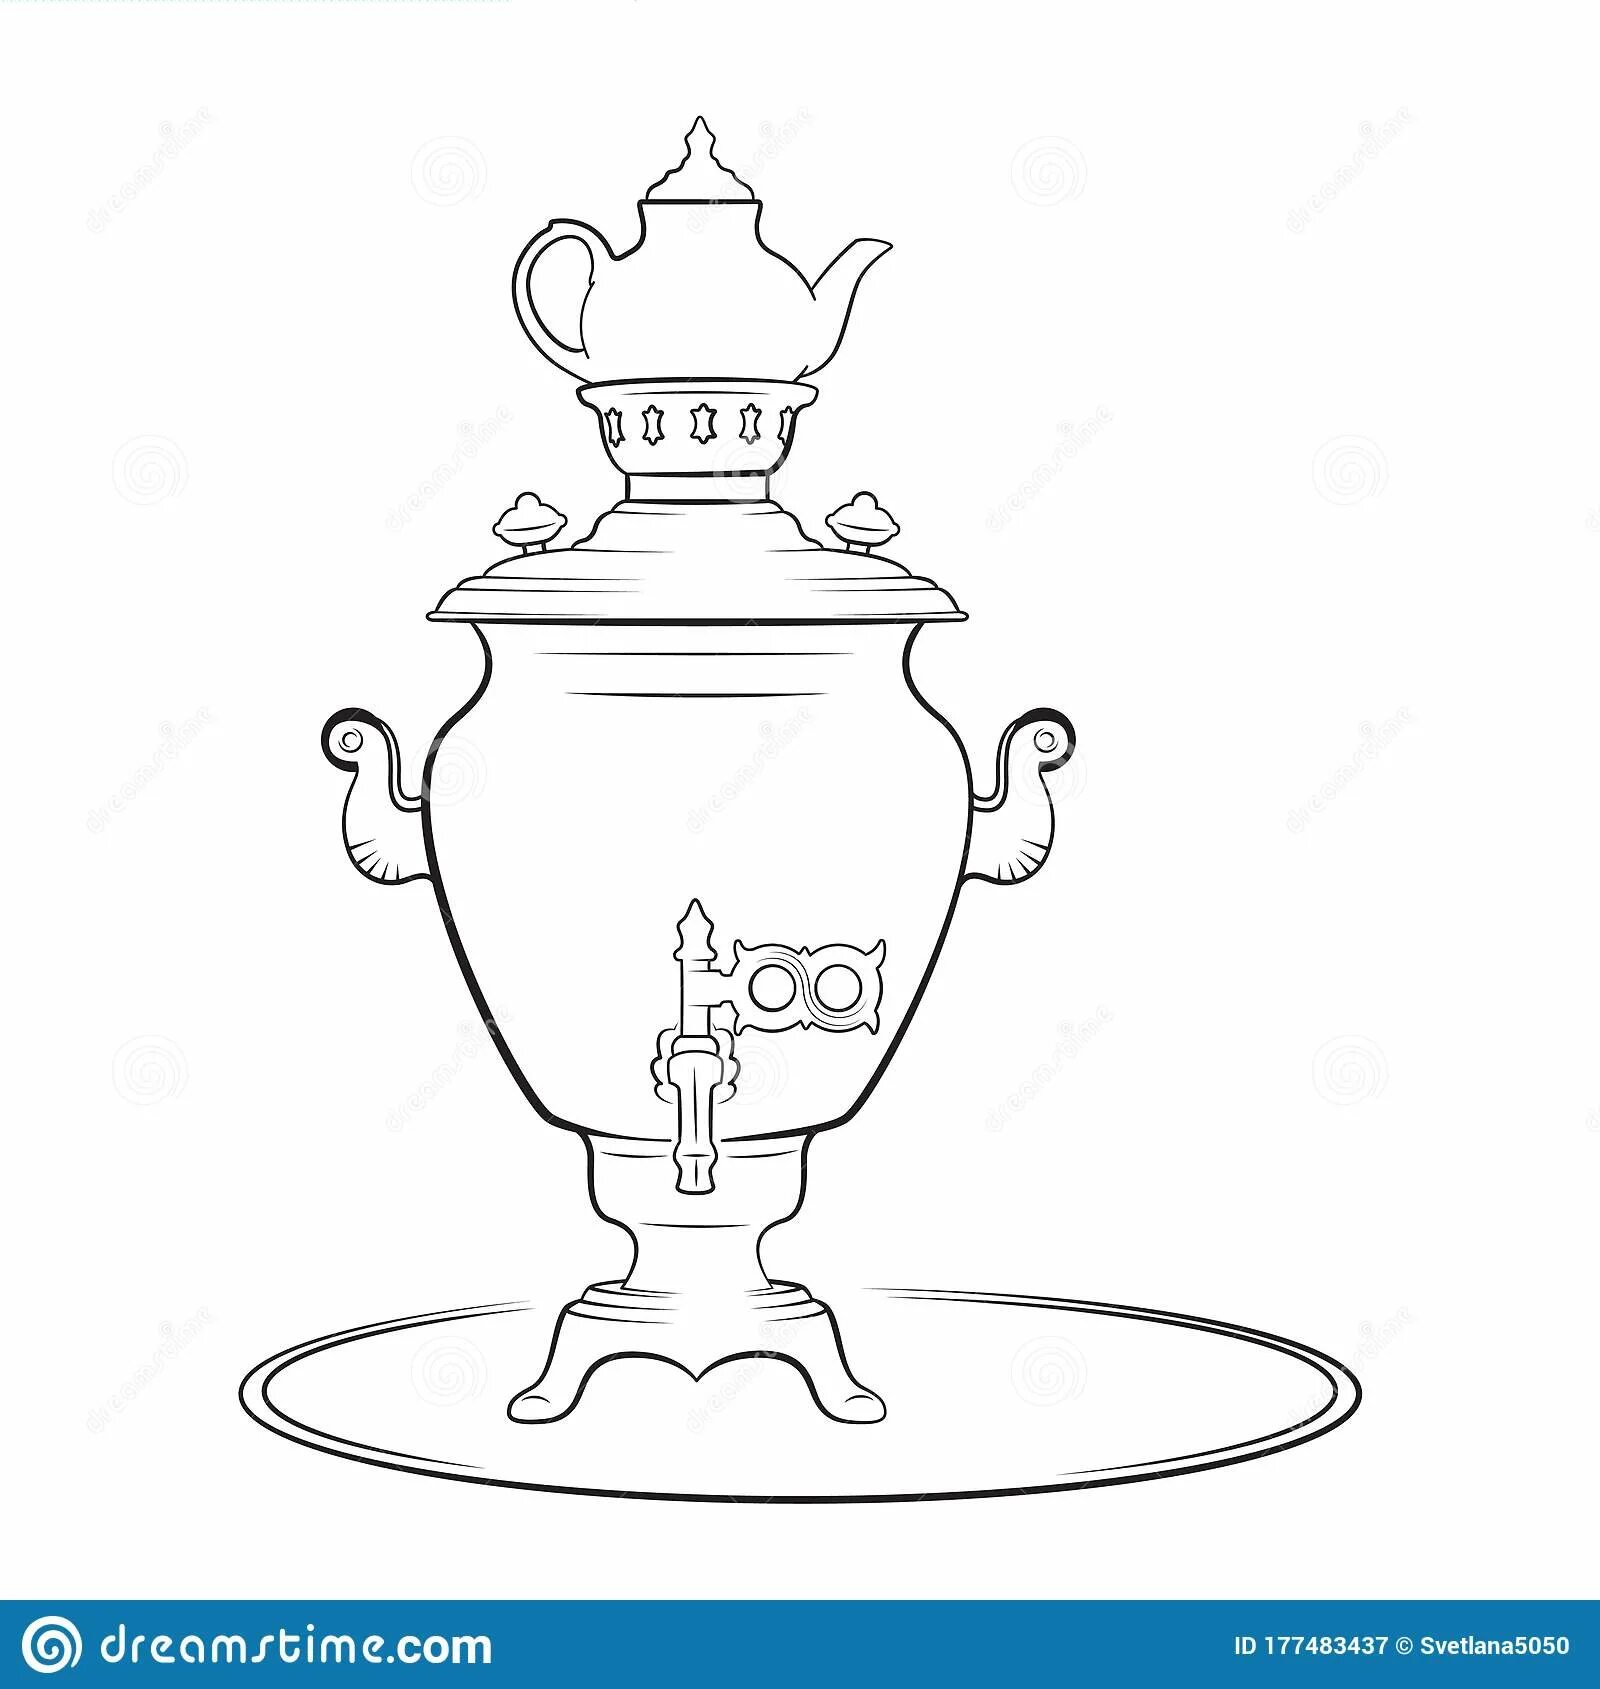 Amazing samovar coloring book for kids